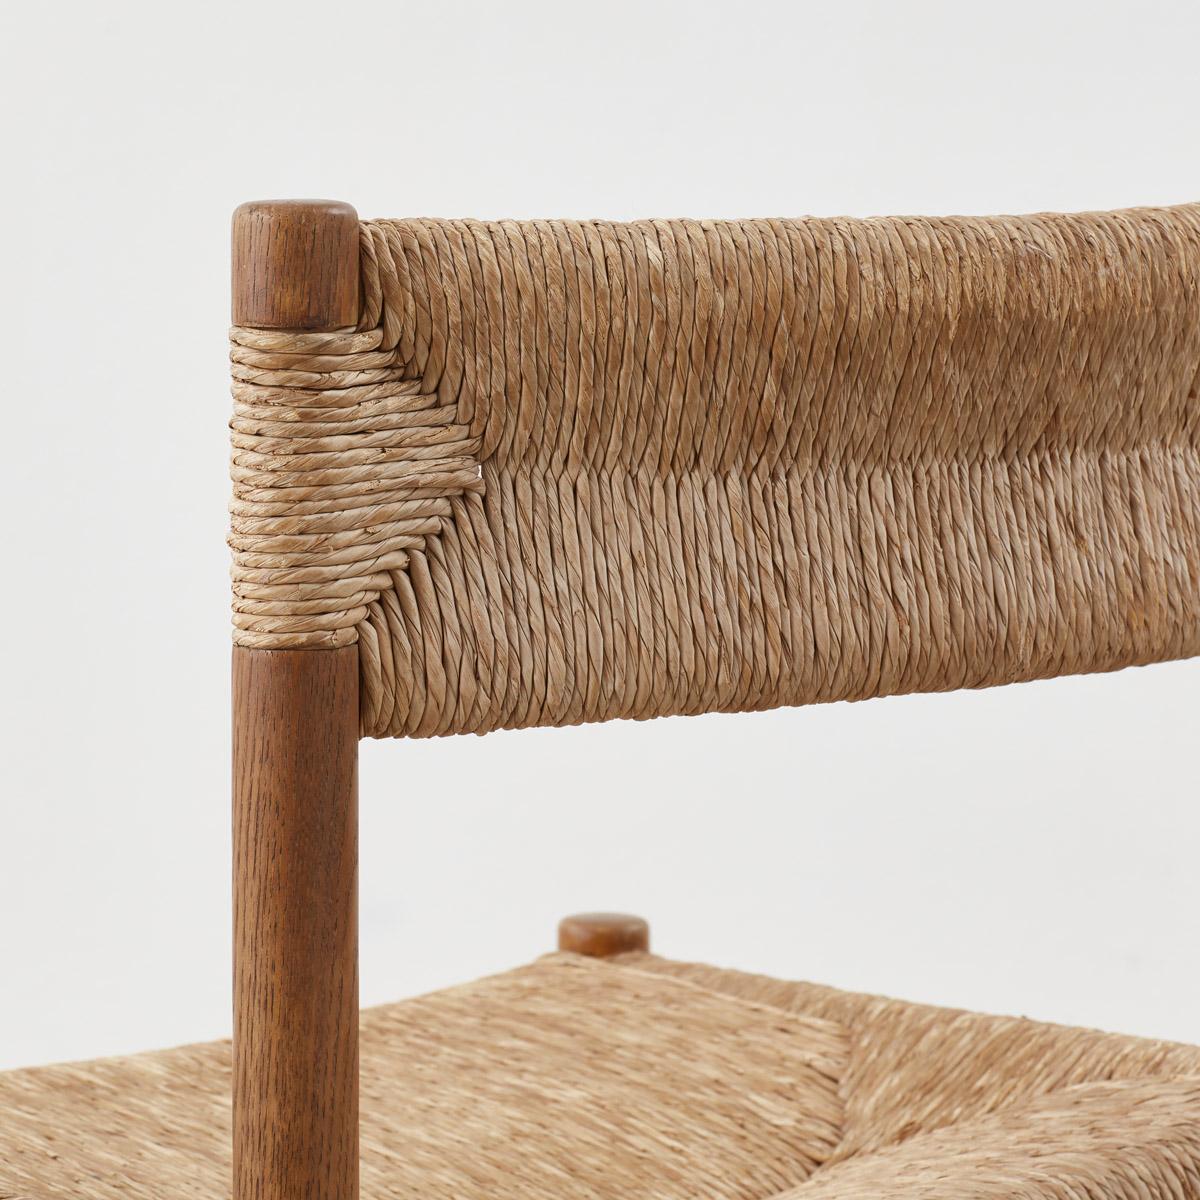 Straw Pair of Charlotte Perriand Dordogne Chairs for Robert Sentou, France c1950 For Sale